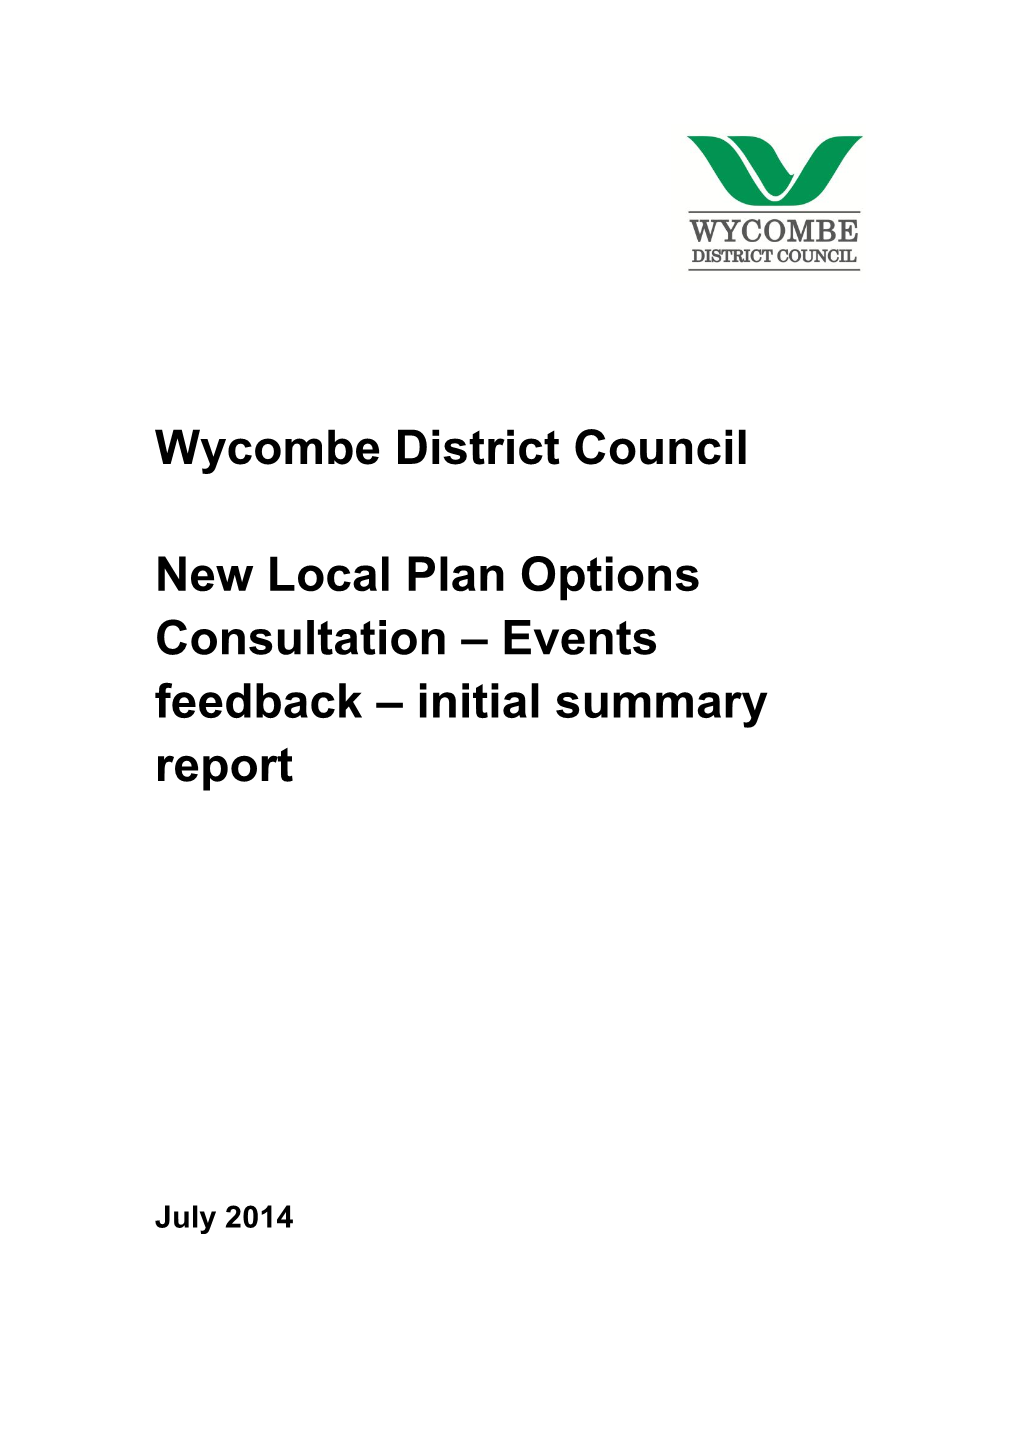 Wycombe District Council New Local Plan Options Consultation – Events